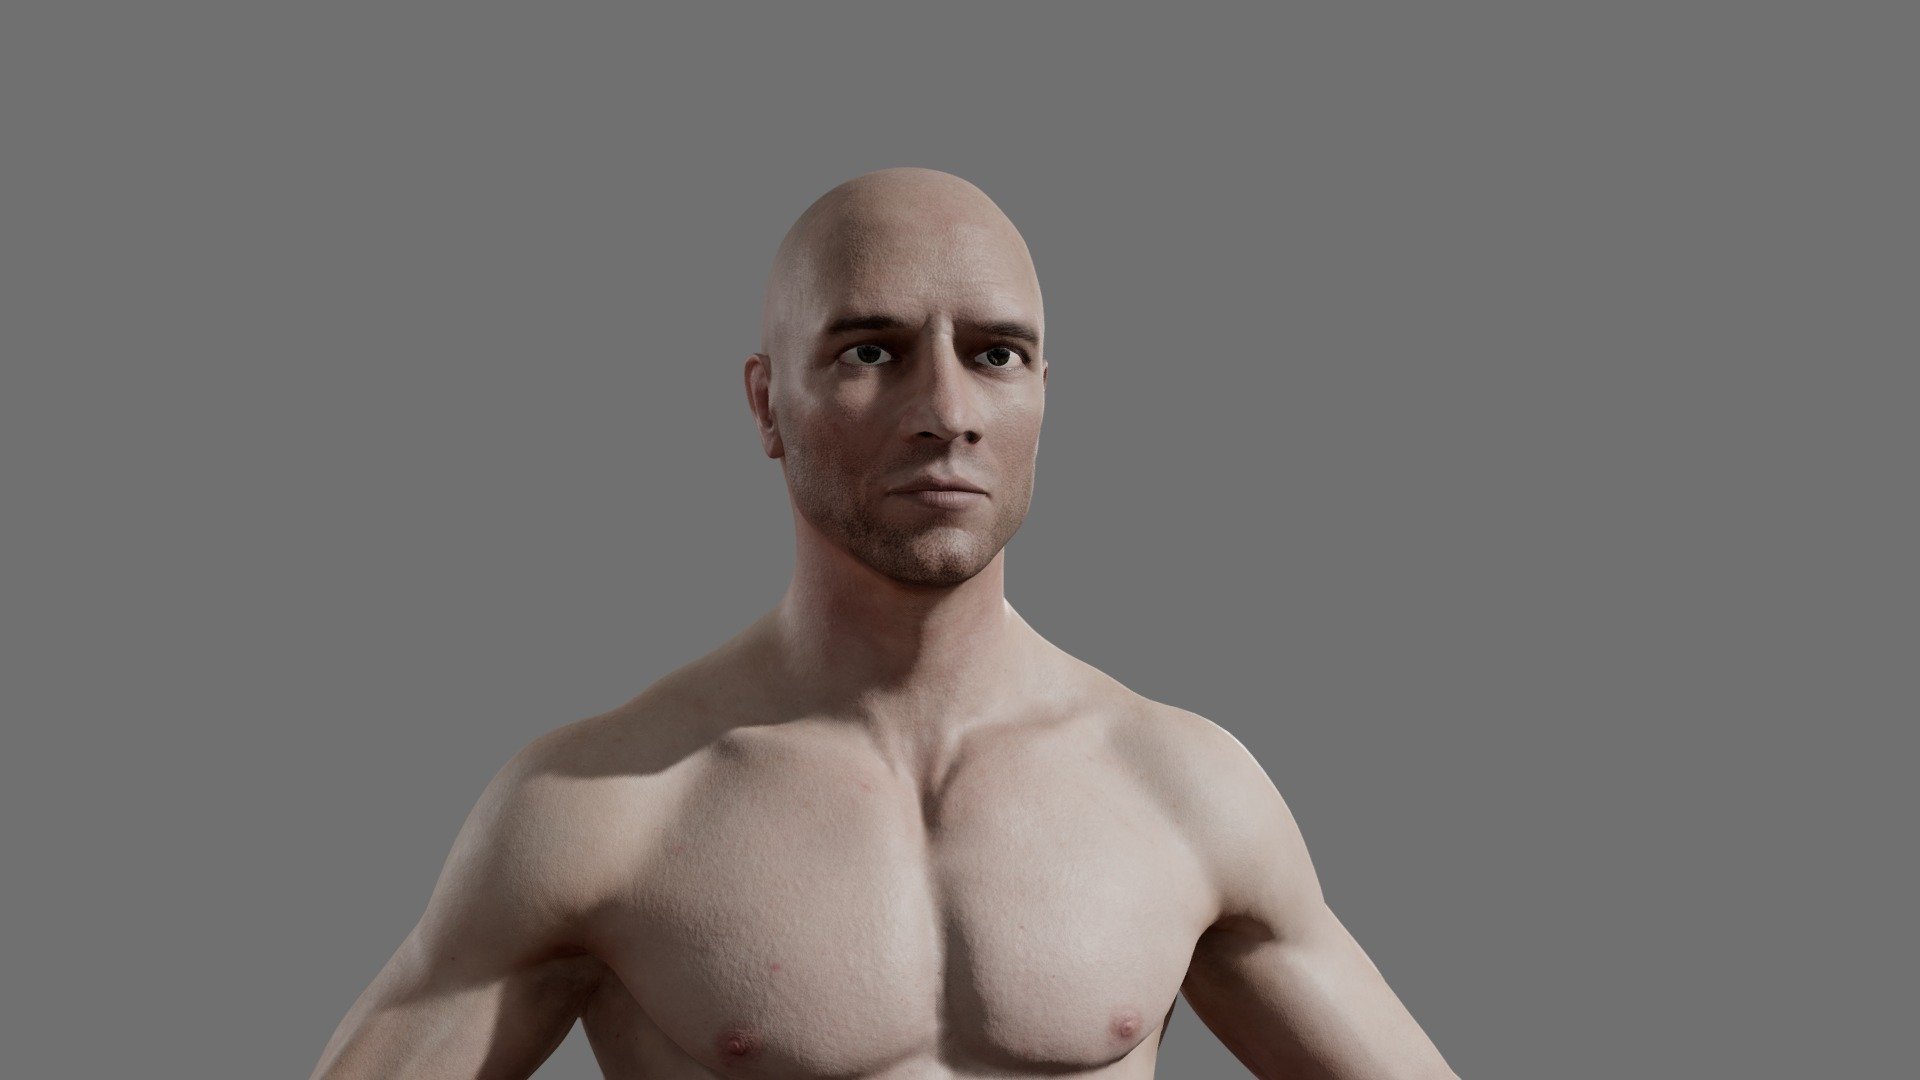 High quality 3D model of the Male Character for films/ games / animations / apps / VR / AR with PBR 8k textures

Clean topology based on quads and tris. This model is completely UVunwrapped. There is full lighting scene in Marmoset Toolbag

Textures
-Includes 8K PBR textures

Total: 
-Polygons: 64156
-Vertices: 64750

Available formats:
-fbx
-obj
-3ds
-dae 

Additional Notes
-If you have any problem or question about this model please content me and I will be response as soon as possible . and leave thumb up if you like the model also give a postive rate if you bought this model and you like it.
-Please make sure to check out my other Models, you may find something prefect for your project. Thanks :) - Male Character - 3D model by Cheboksary 3d model